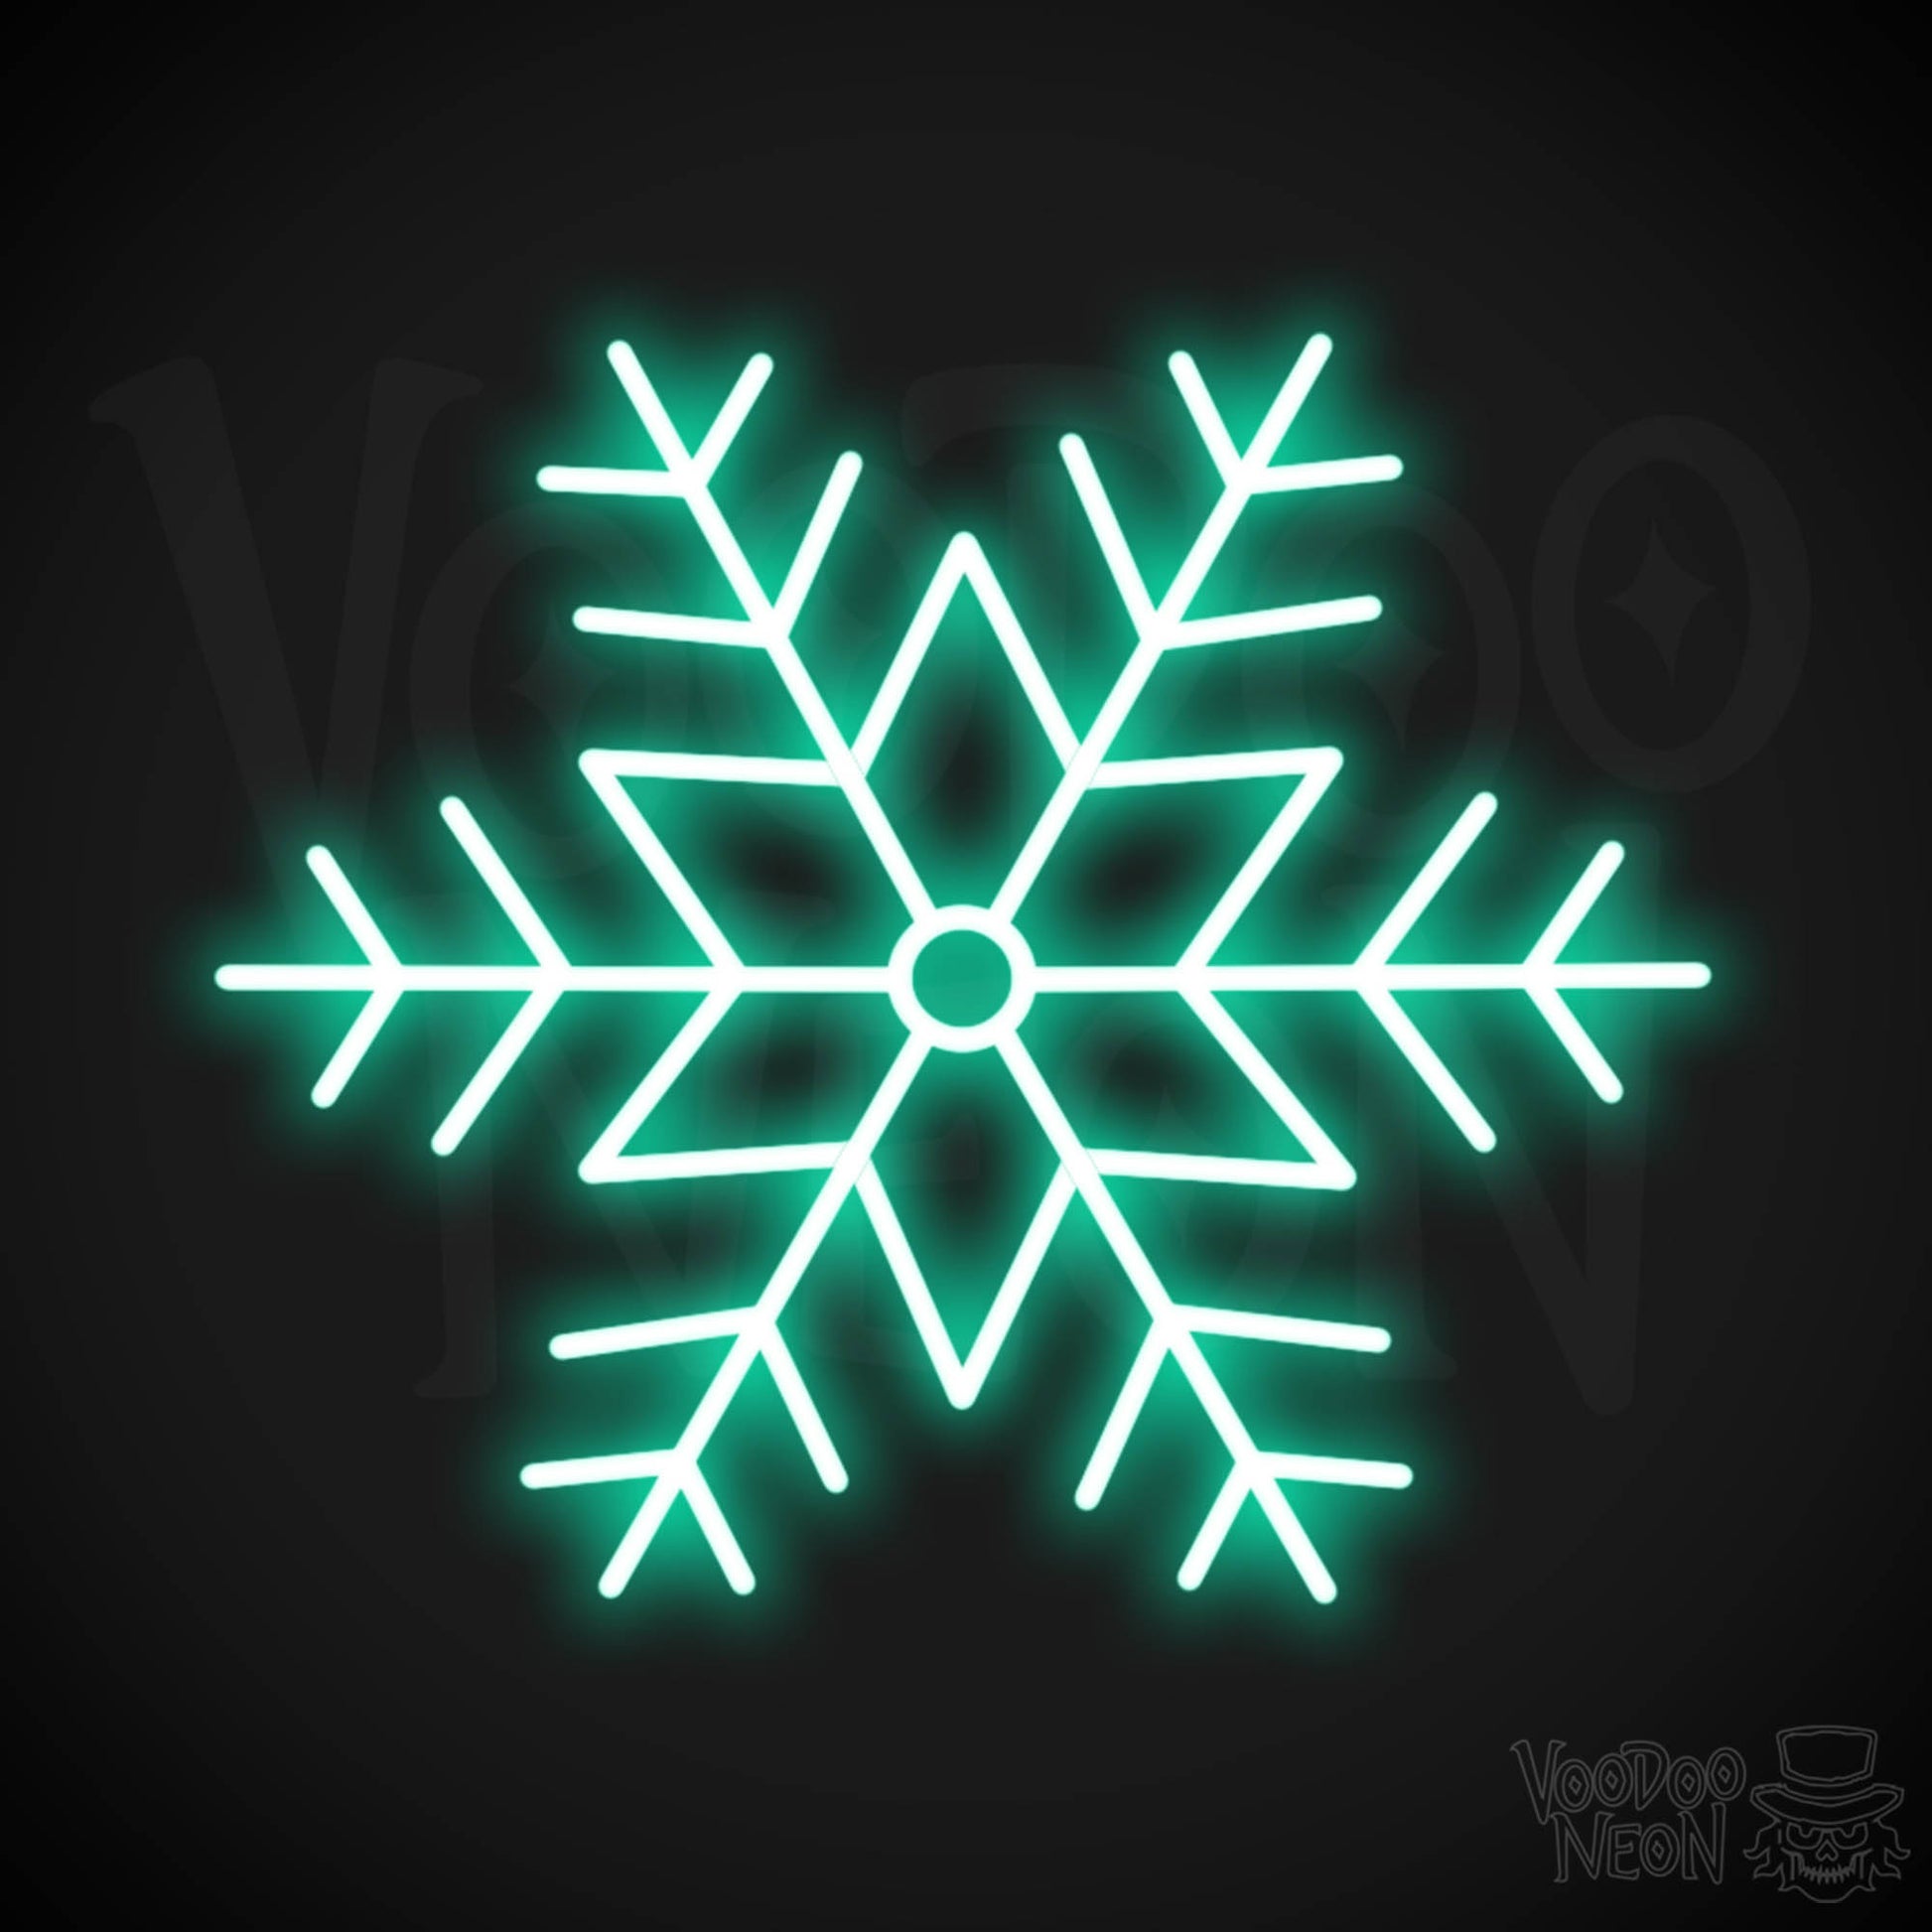 Snow Flakes Neon Sign - Neon Snow Flakes Sign - Xmas LED Wall Art - Color Light Green